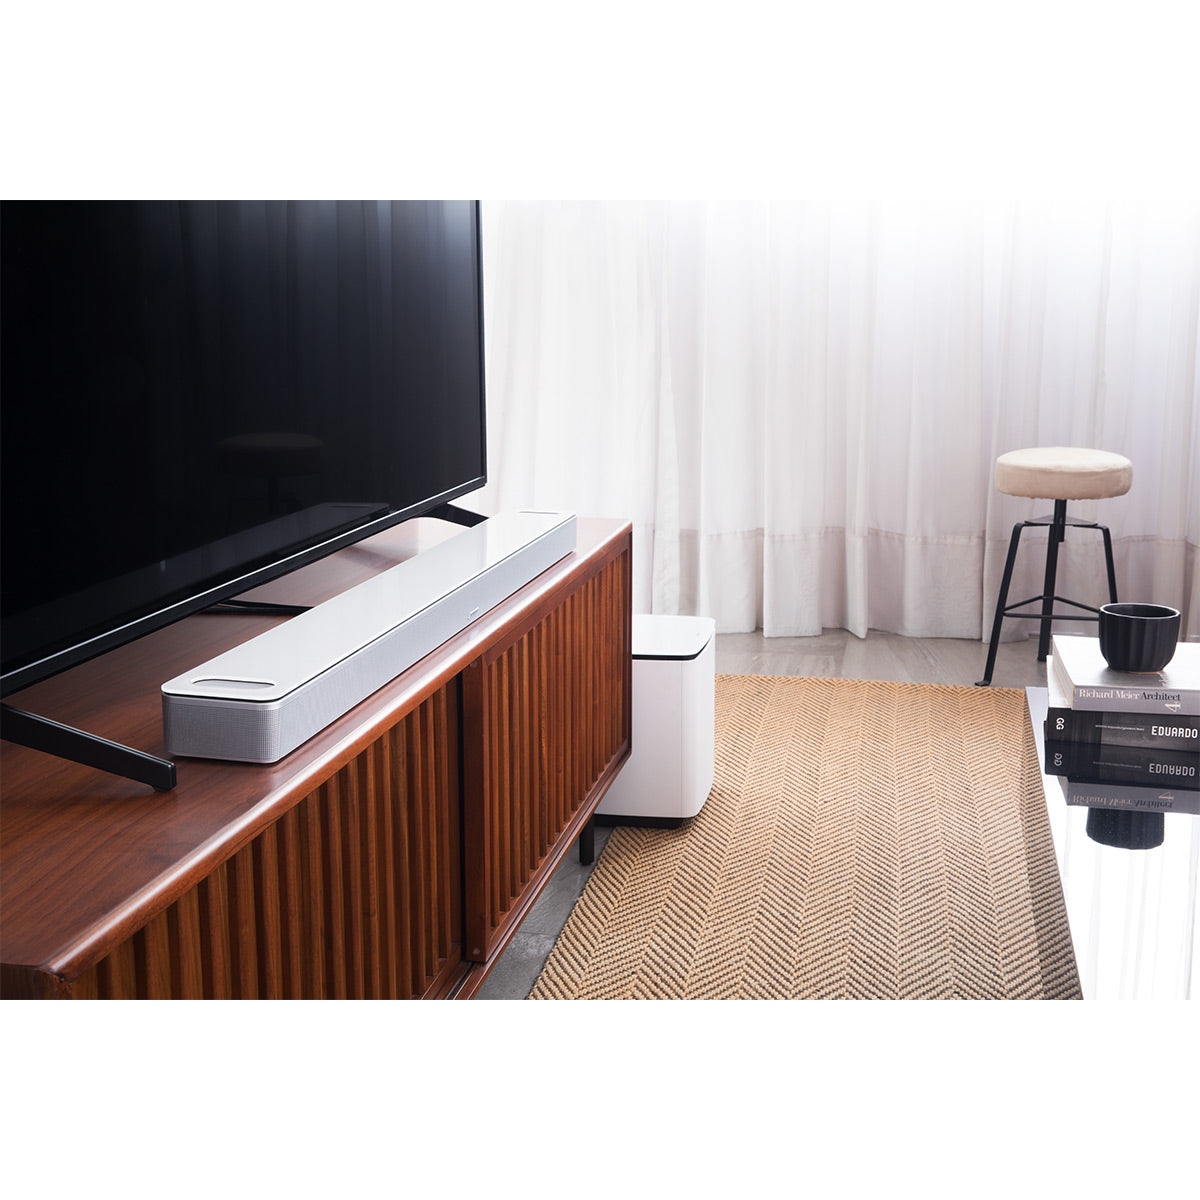 Bose Soundbar 900 Home Theater System with Bass Module 700